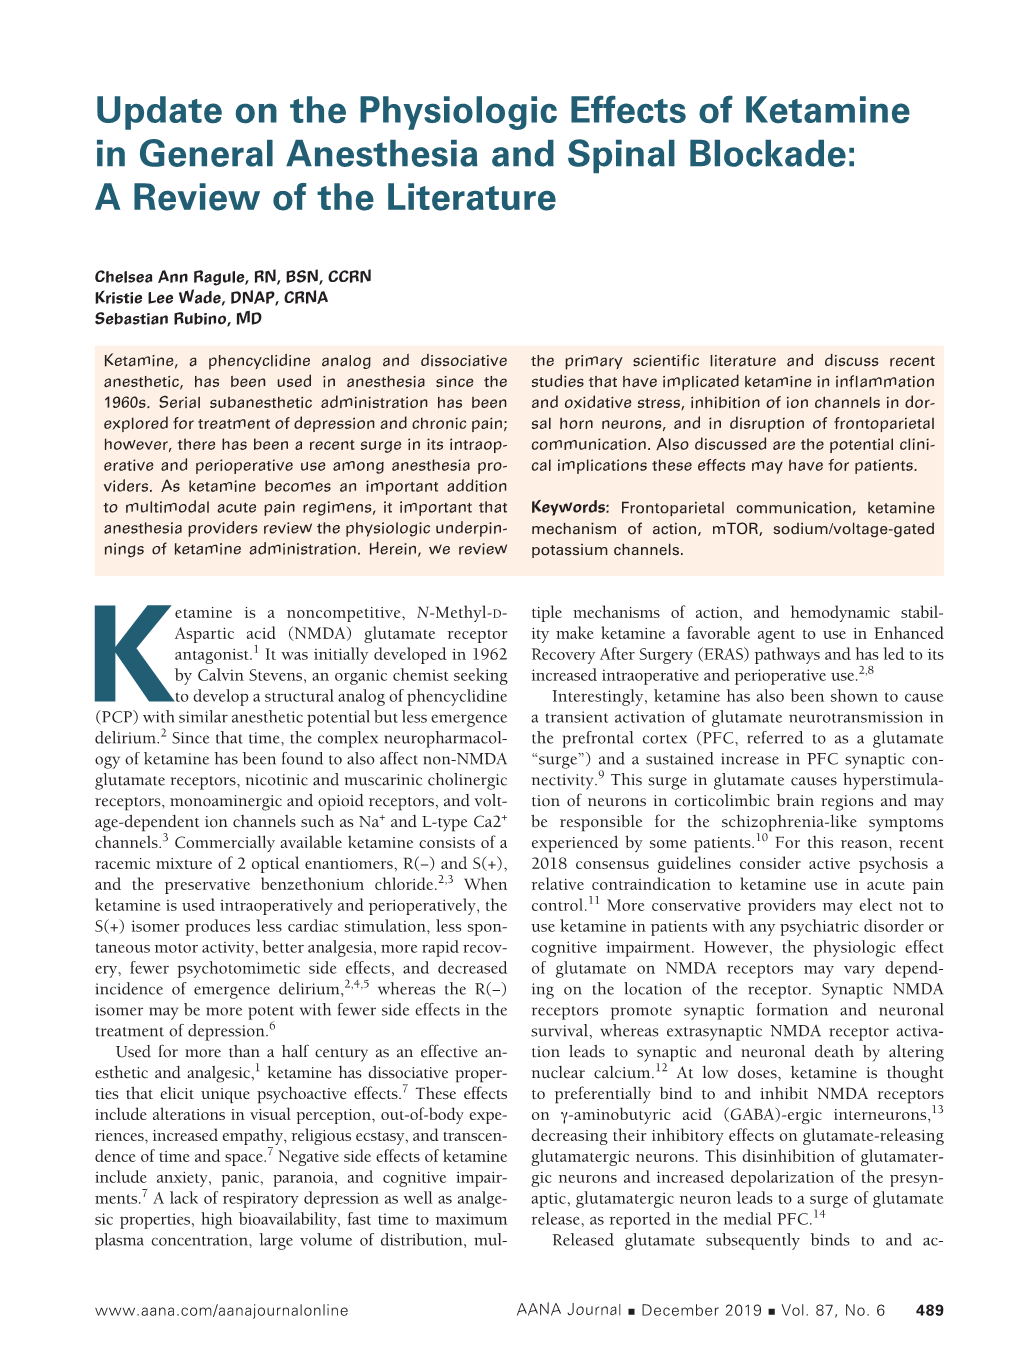 Ketamine in General Anesthesia and Spinal Blockade: a Review of the Literature